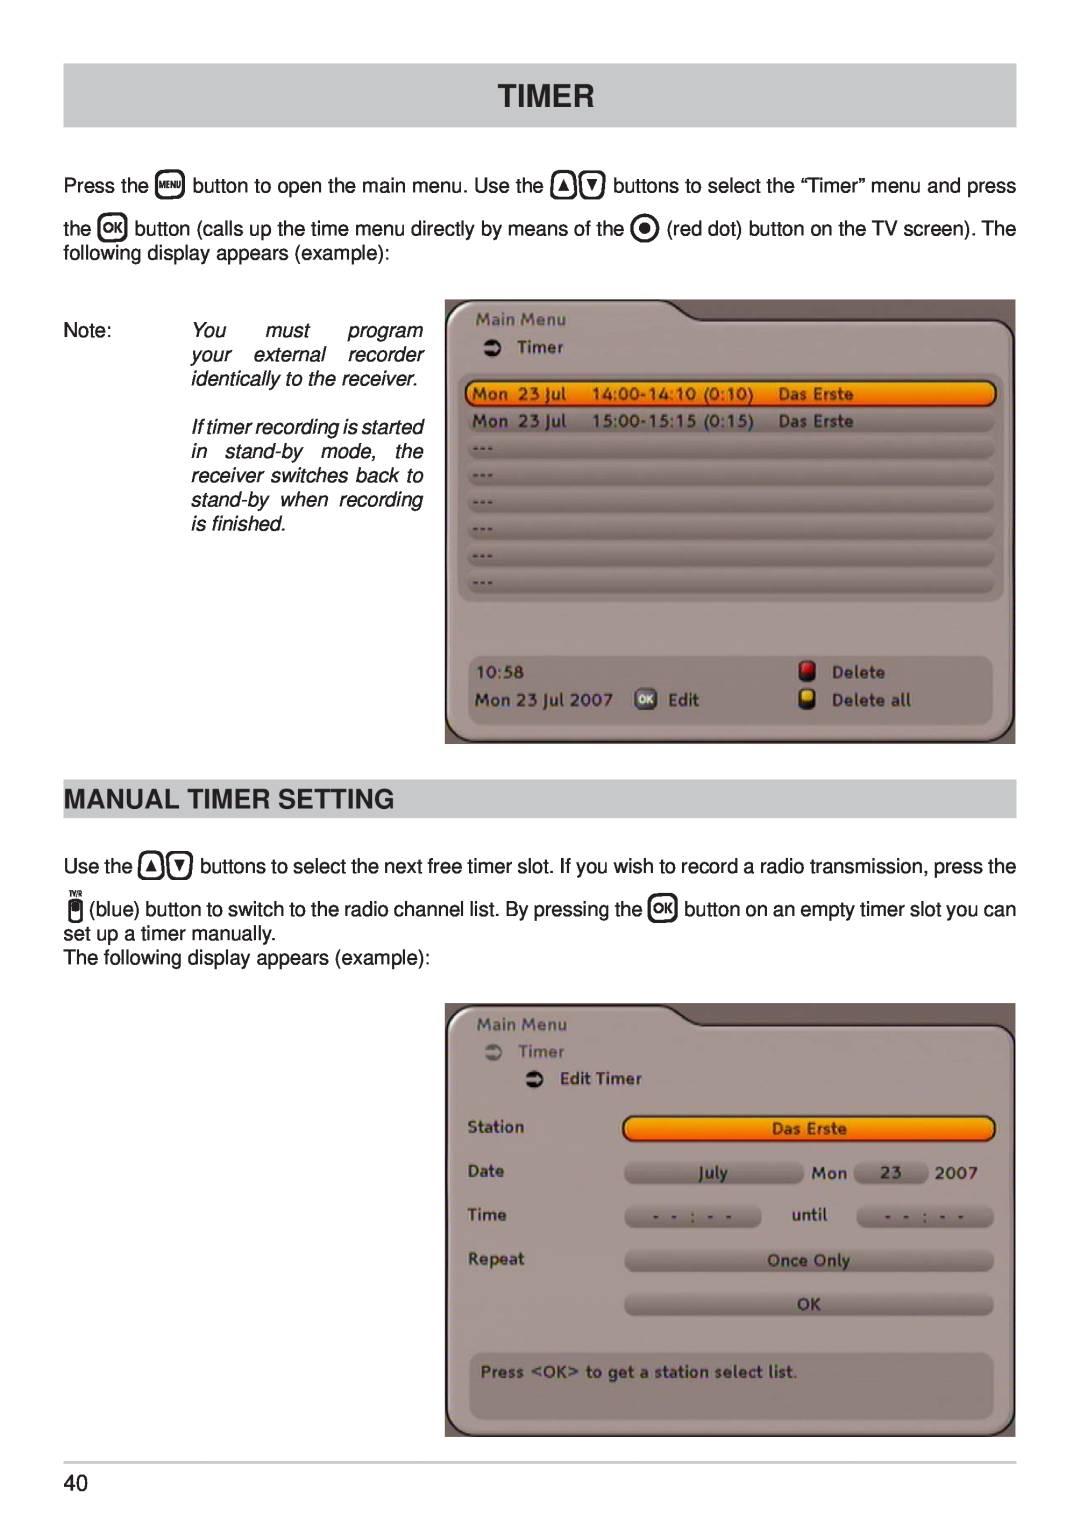 Kathrein UFC 762si, UFC 762sw manual Manual Timer Setting, your, identically to the receiver 